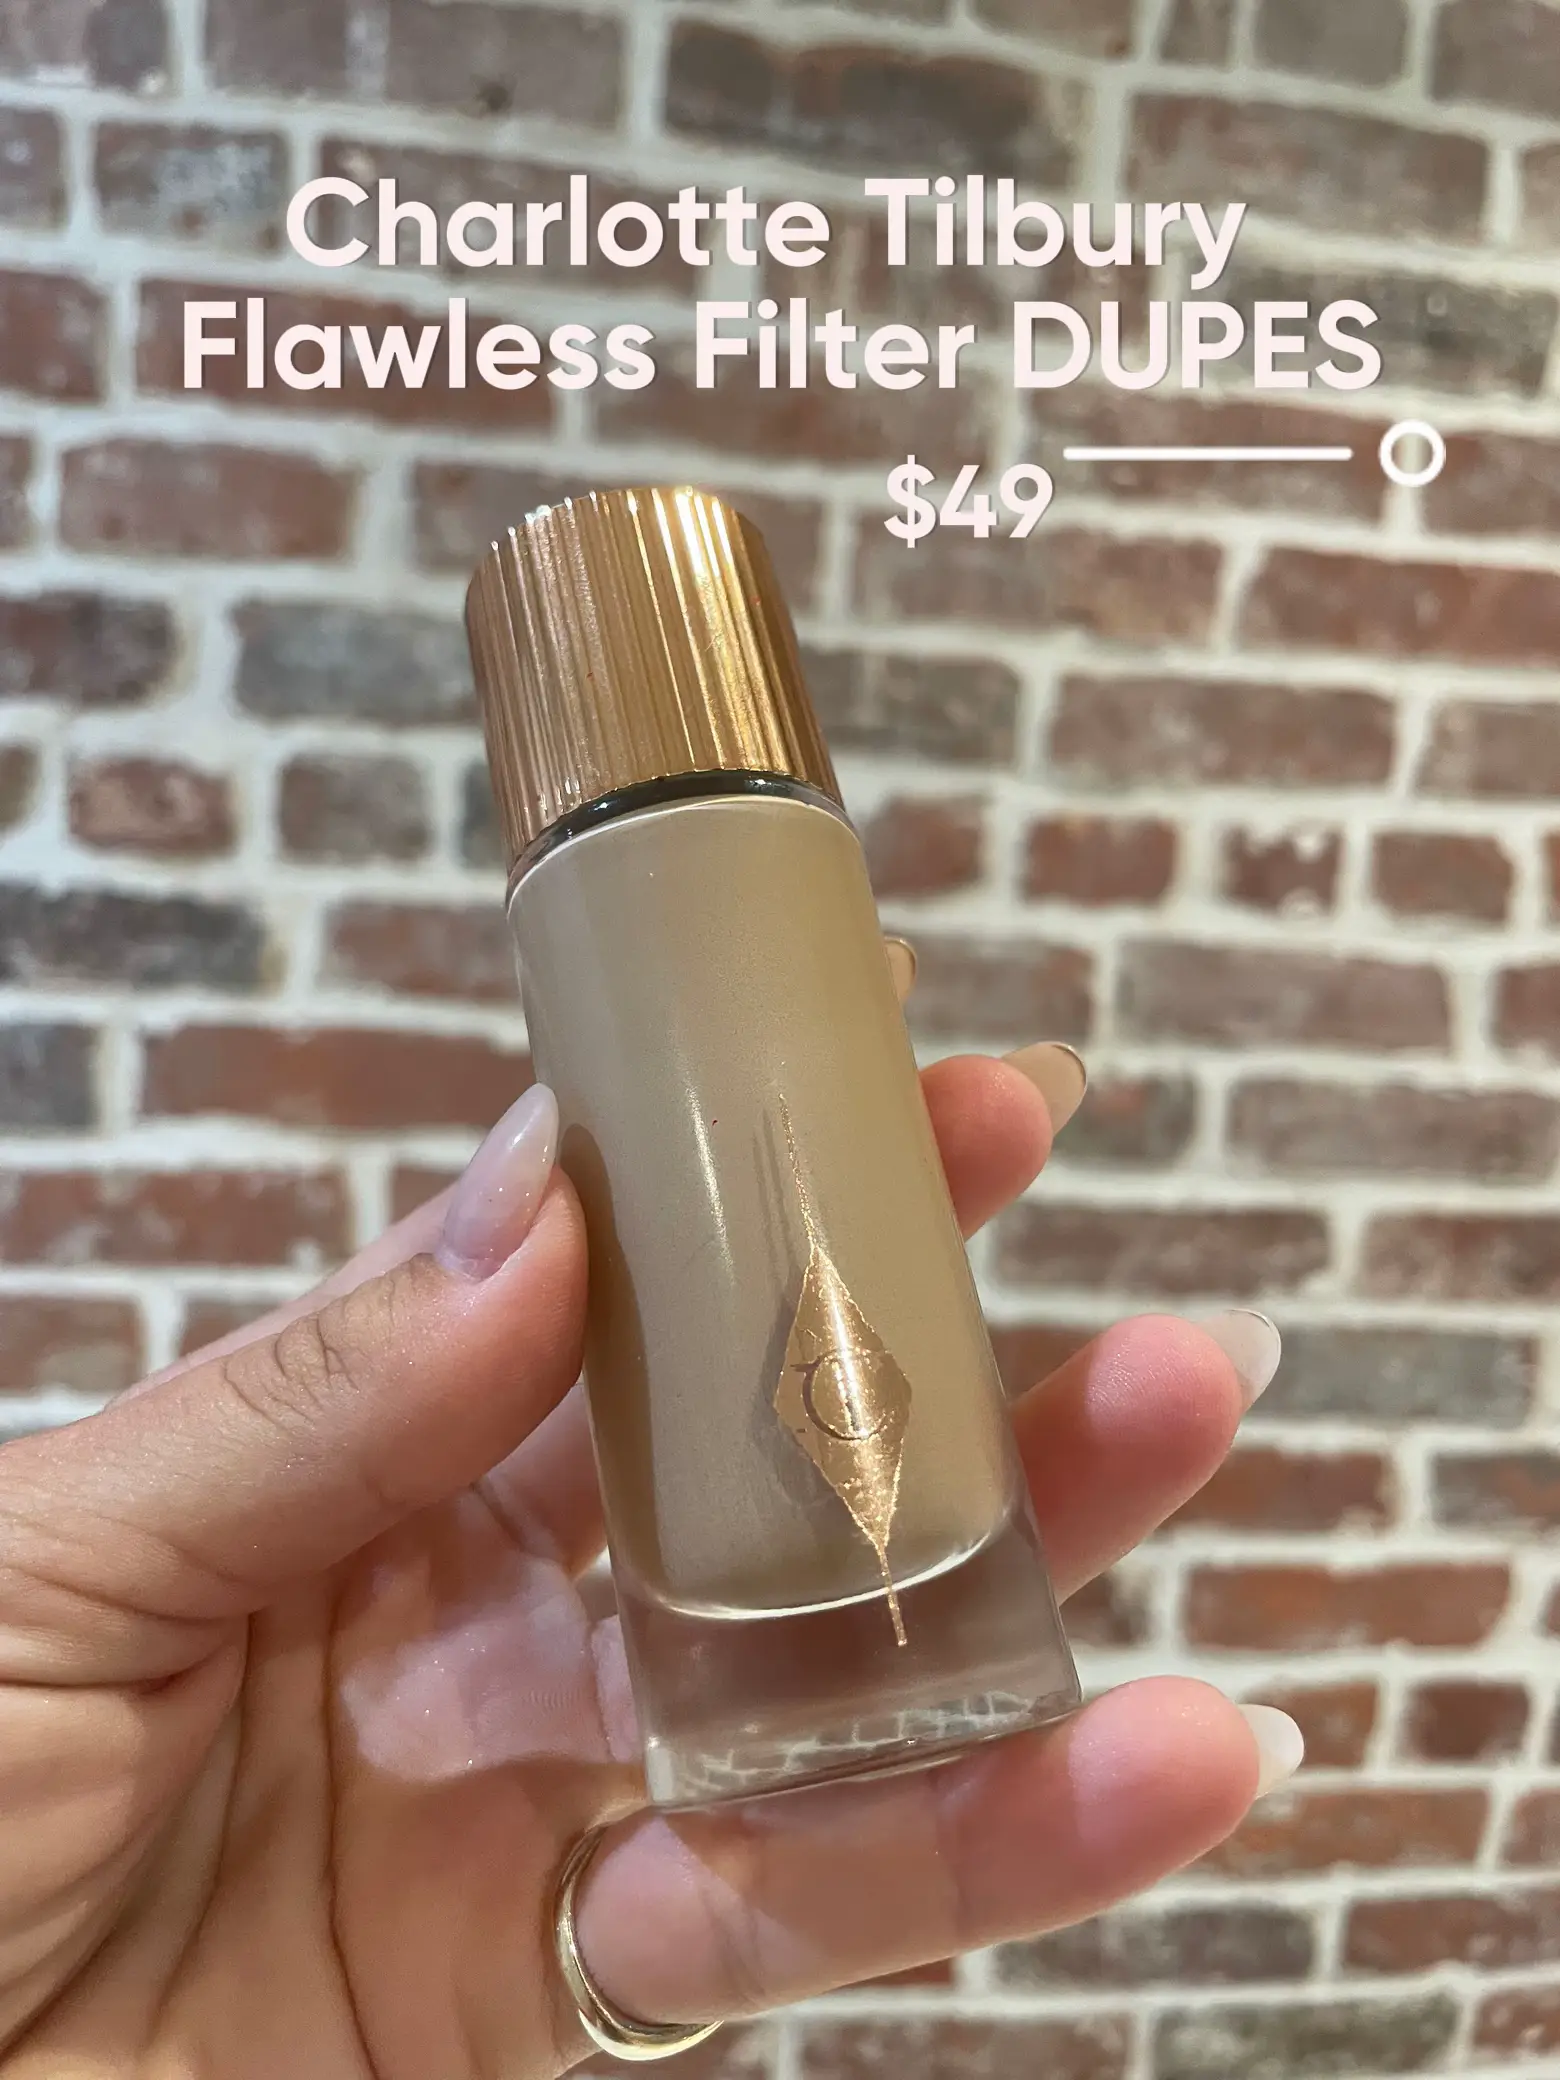 I Tried 4 Charlotte Tilbury Flawless Filter Dupes